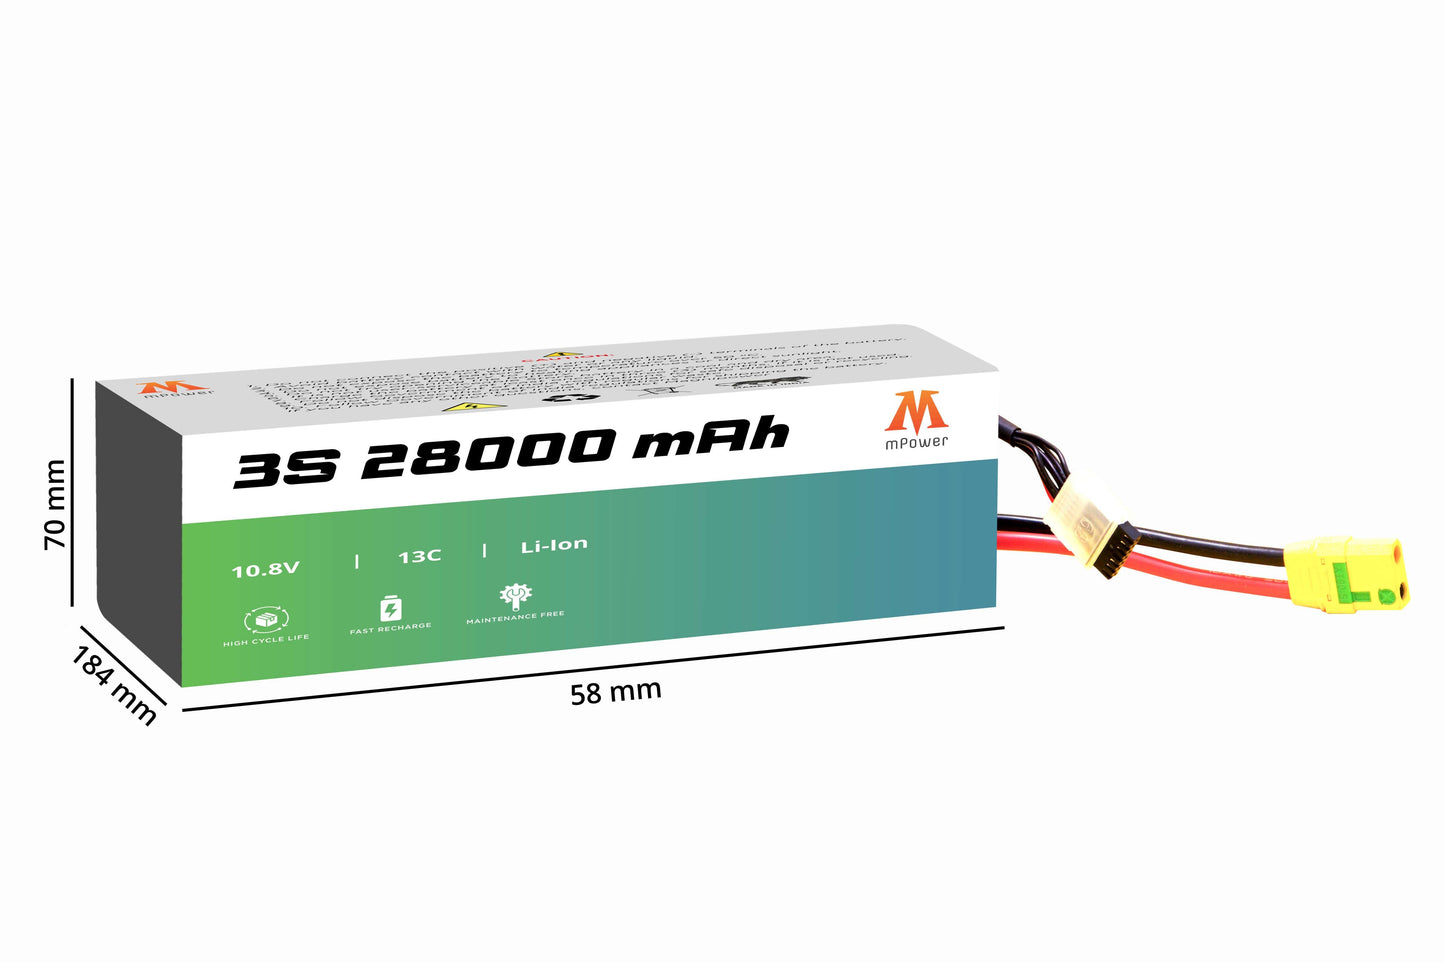 mPower 3S 28000mAh Lithium-Ion Battery for Survey Drones